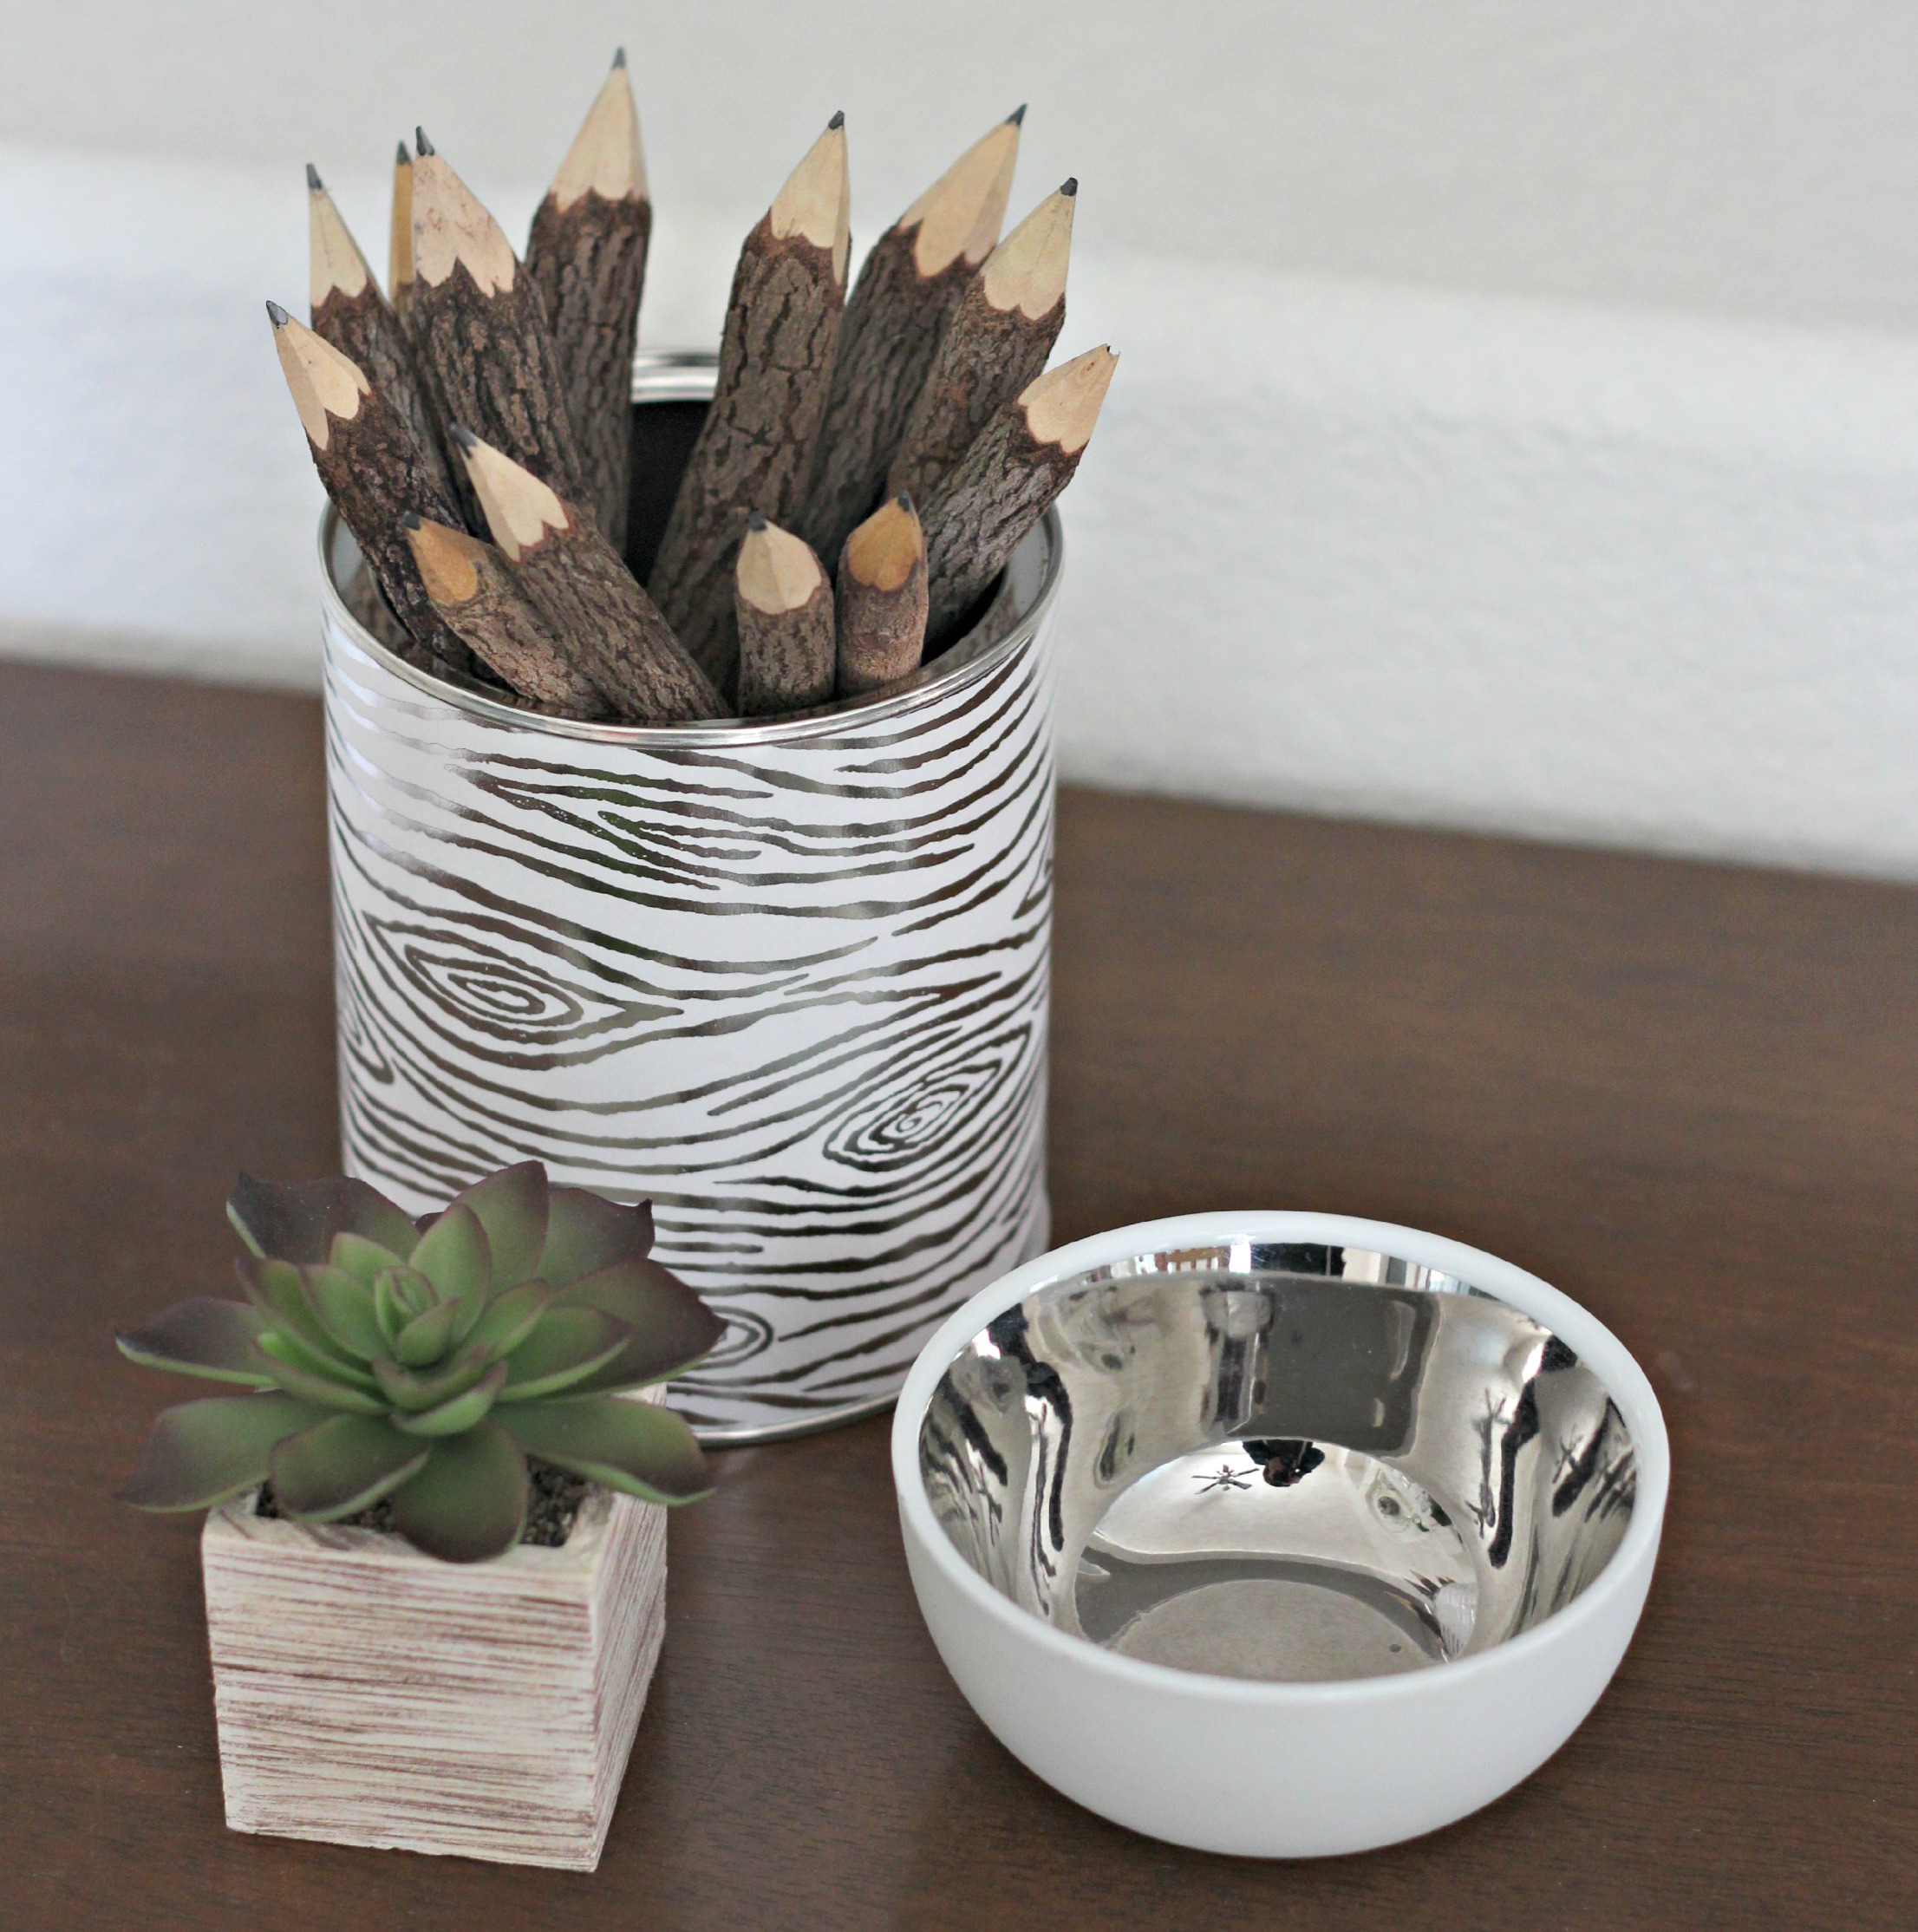 Recycled Pencil Holder.2 1 